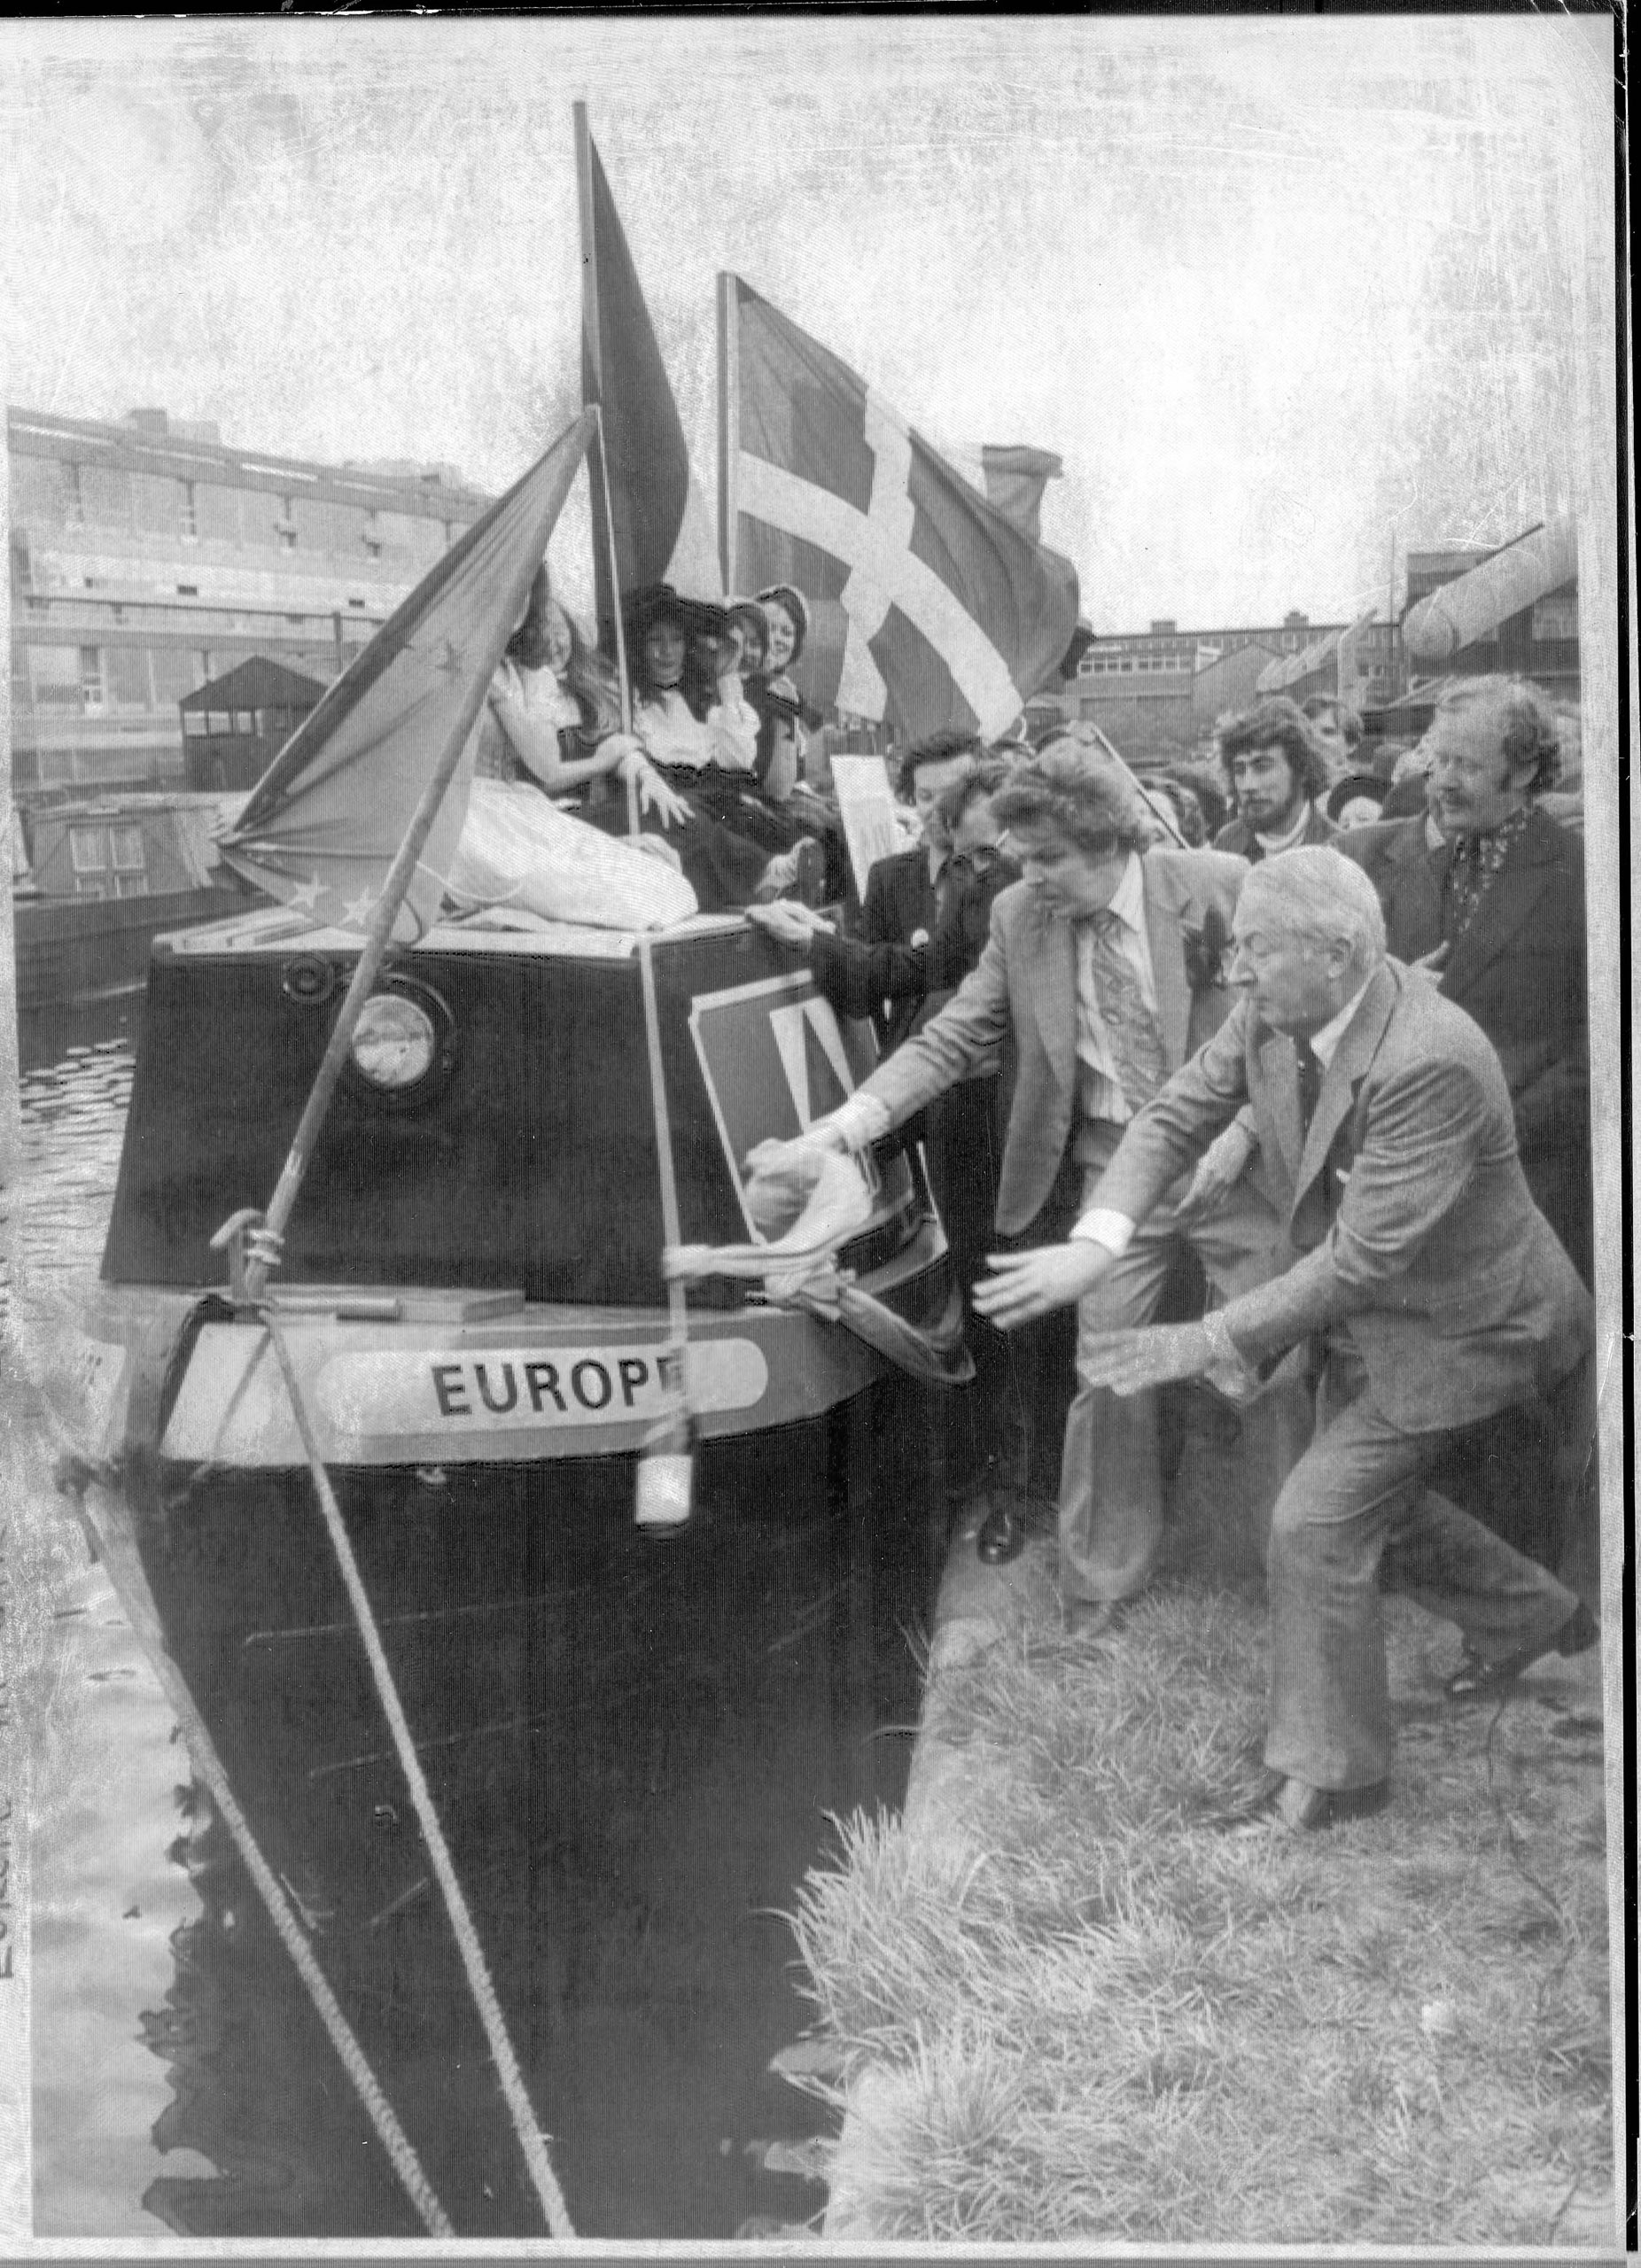 Mr Edward Heath goes aboard the Europe boat on Birmingham's canal, as part of Britain in Europe campaign,1975.